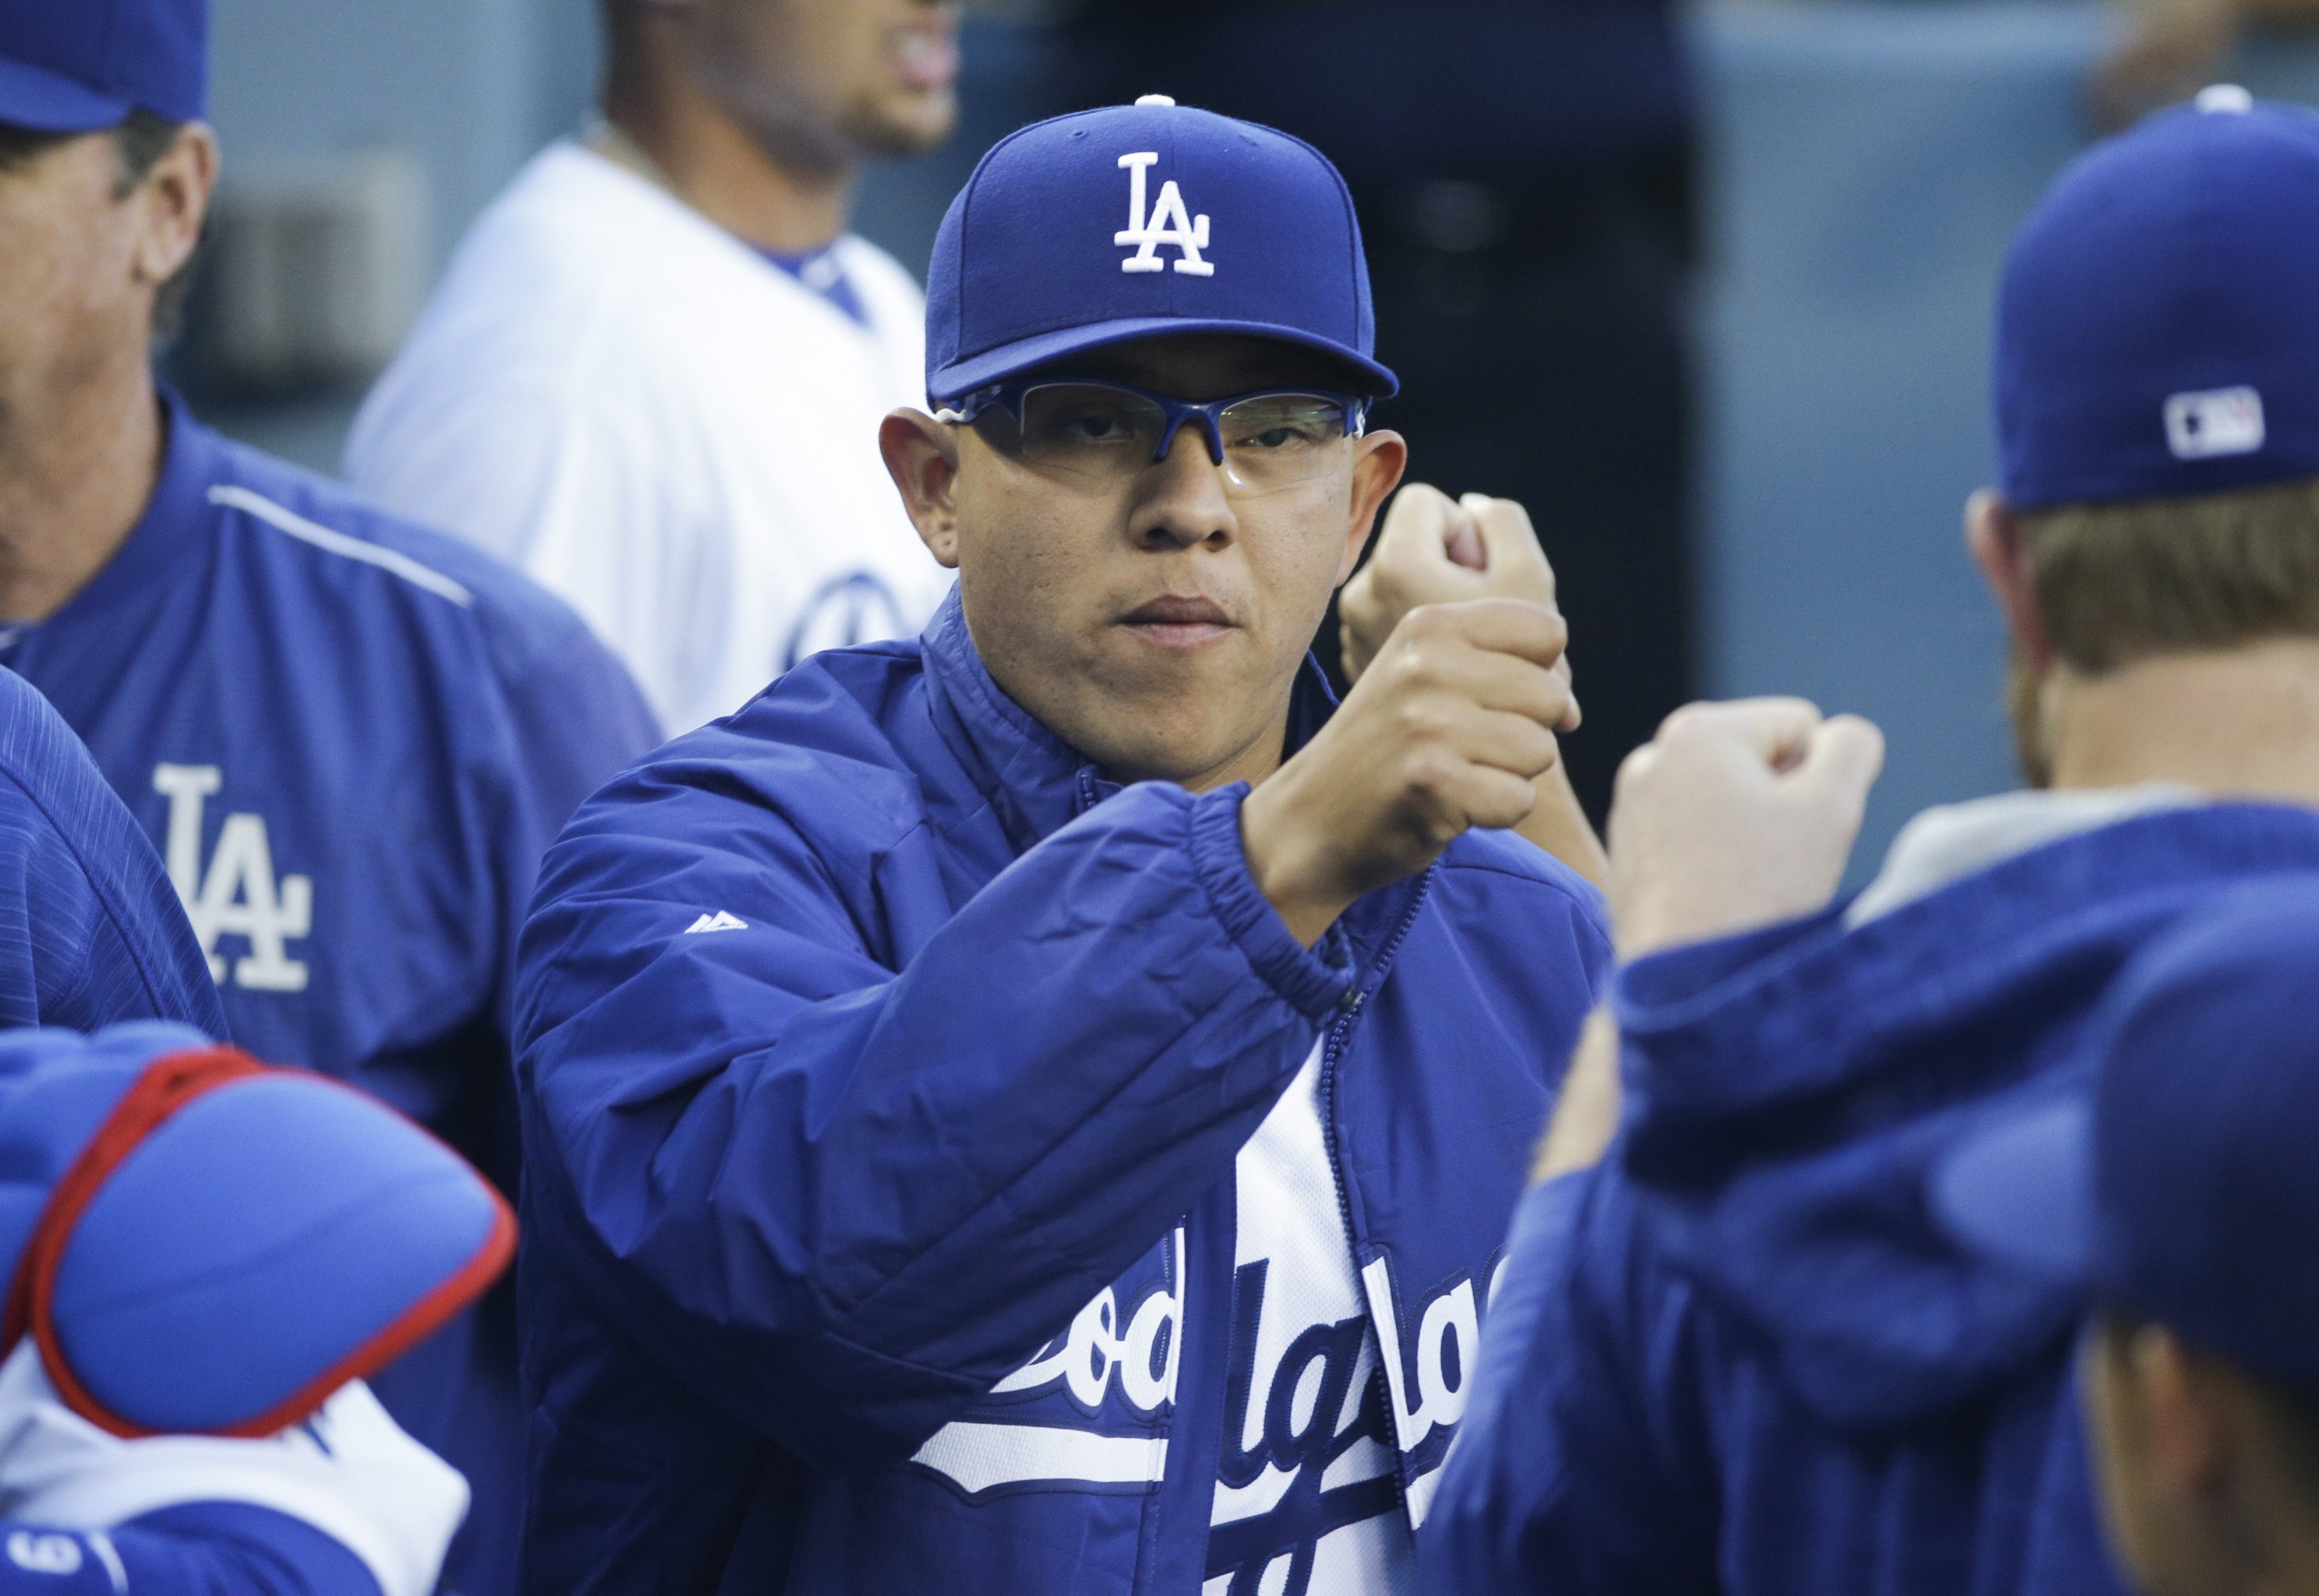 Los Angeles Dodgers and Julio Urias reach agreement for next